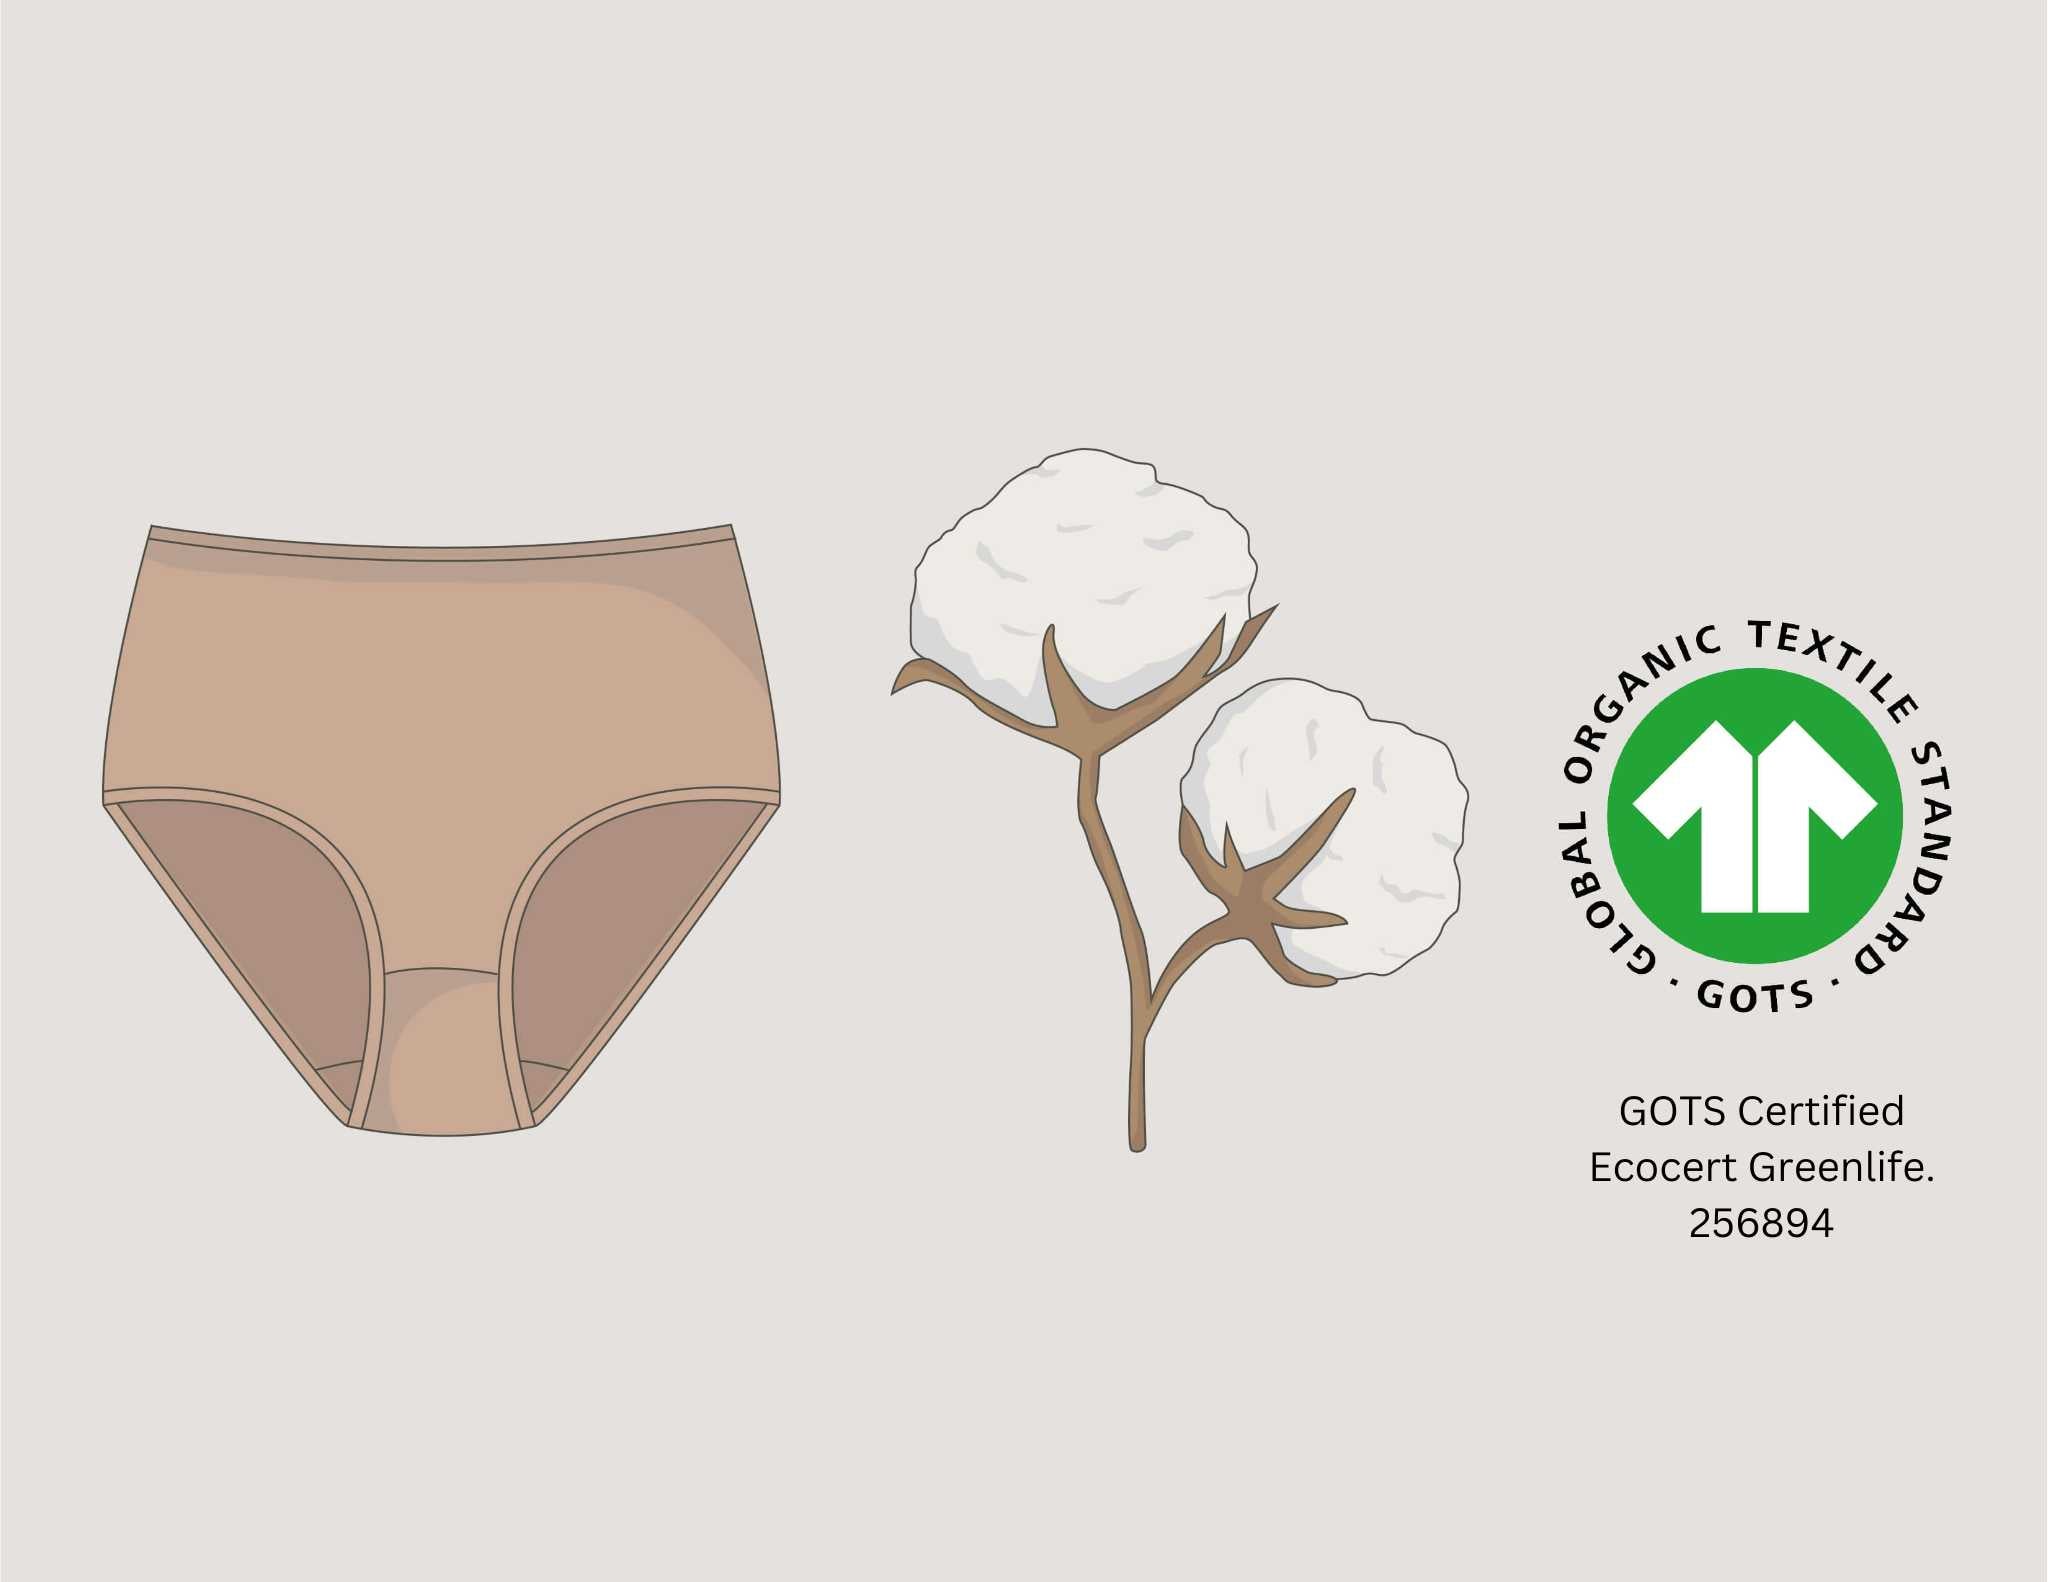 How to choose the perfect underwear to complement your outfit